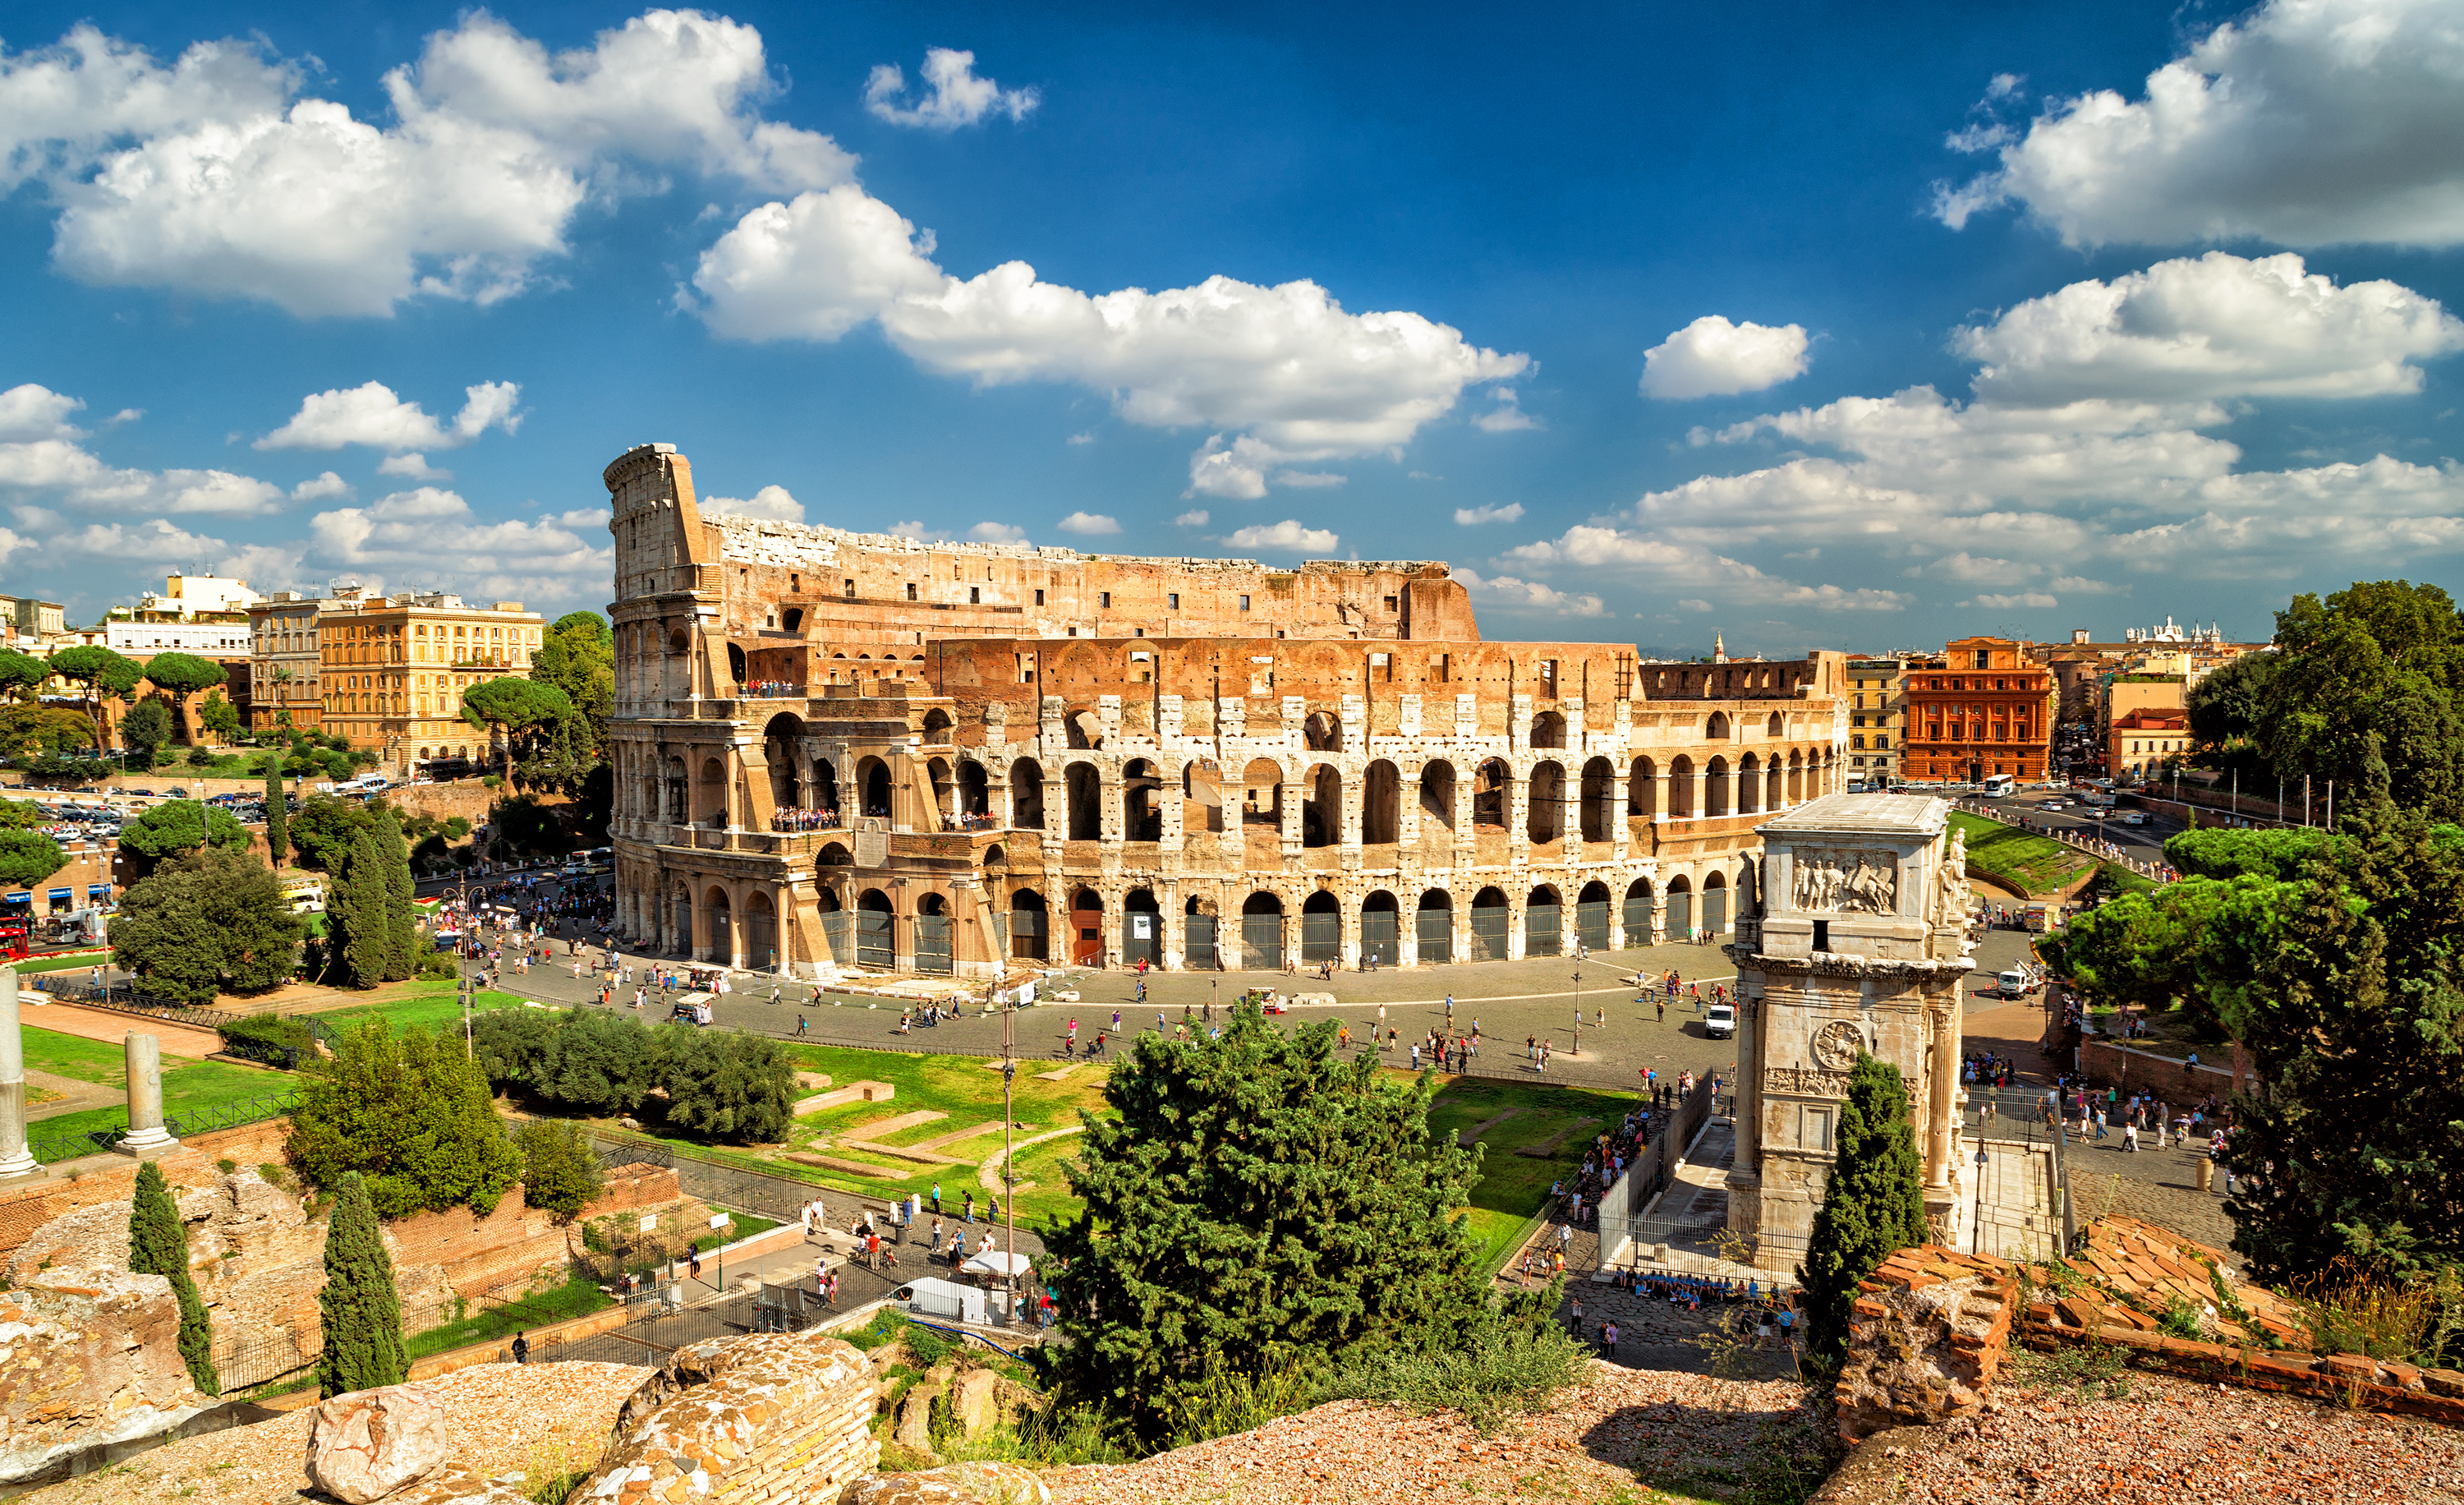 The Italian capital, with a history spanning more than 28 centuries, is also home to the city-state of the Vatican, enclosed within its territory. To run in Rome is to admire its countless wonders, following the meanders of the streets and time.